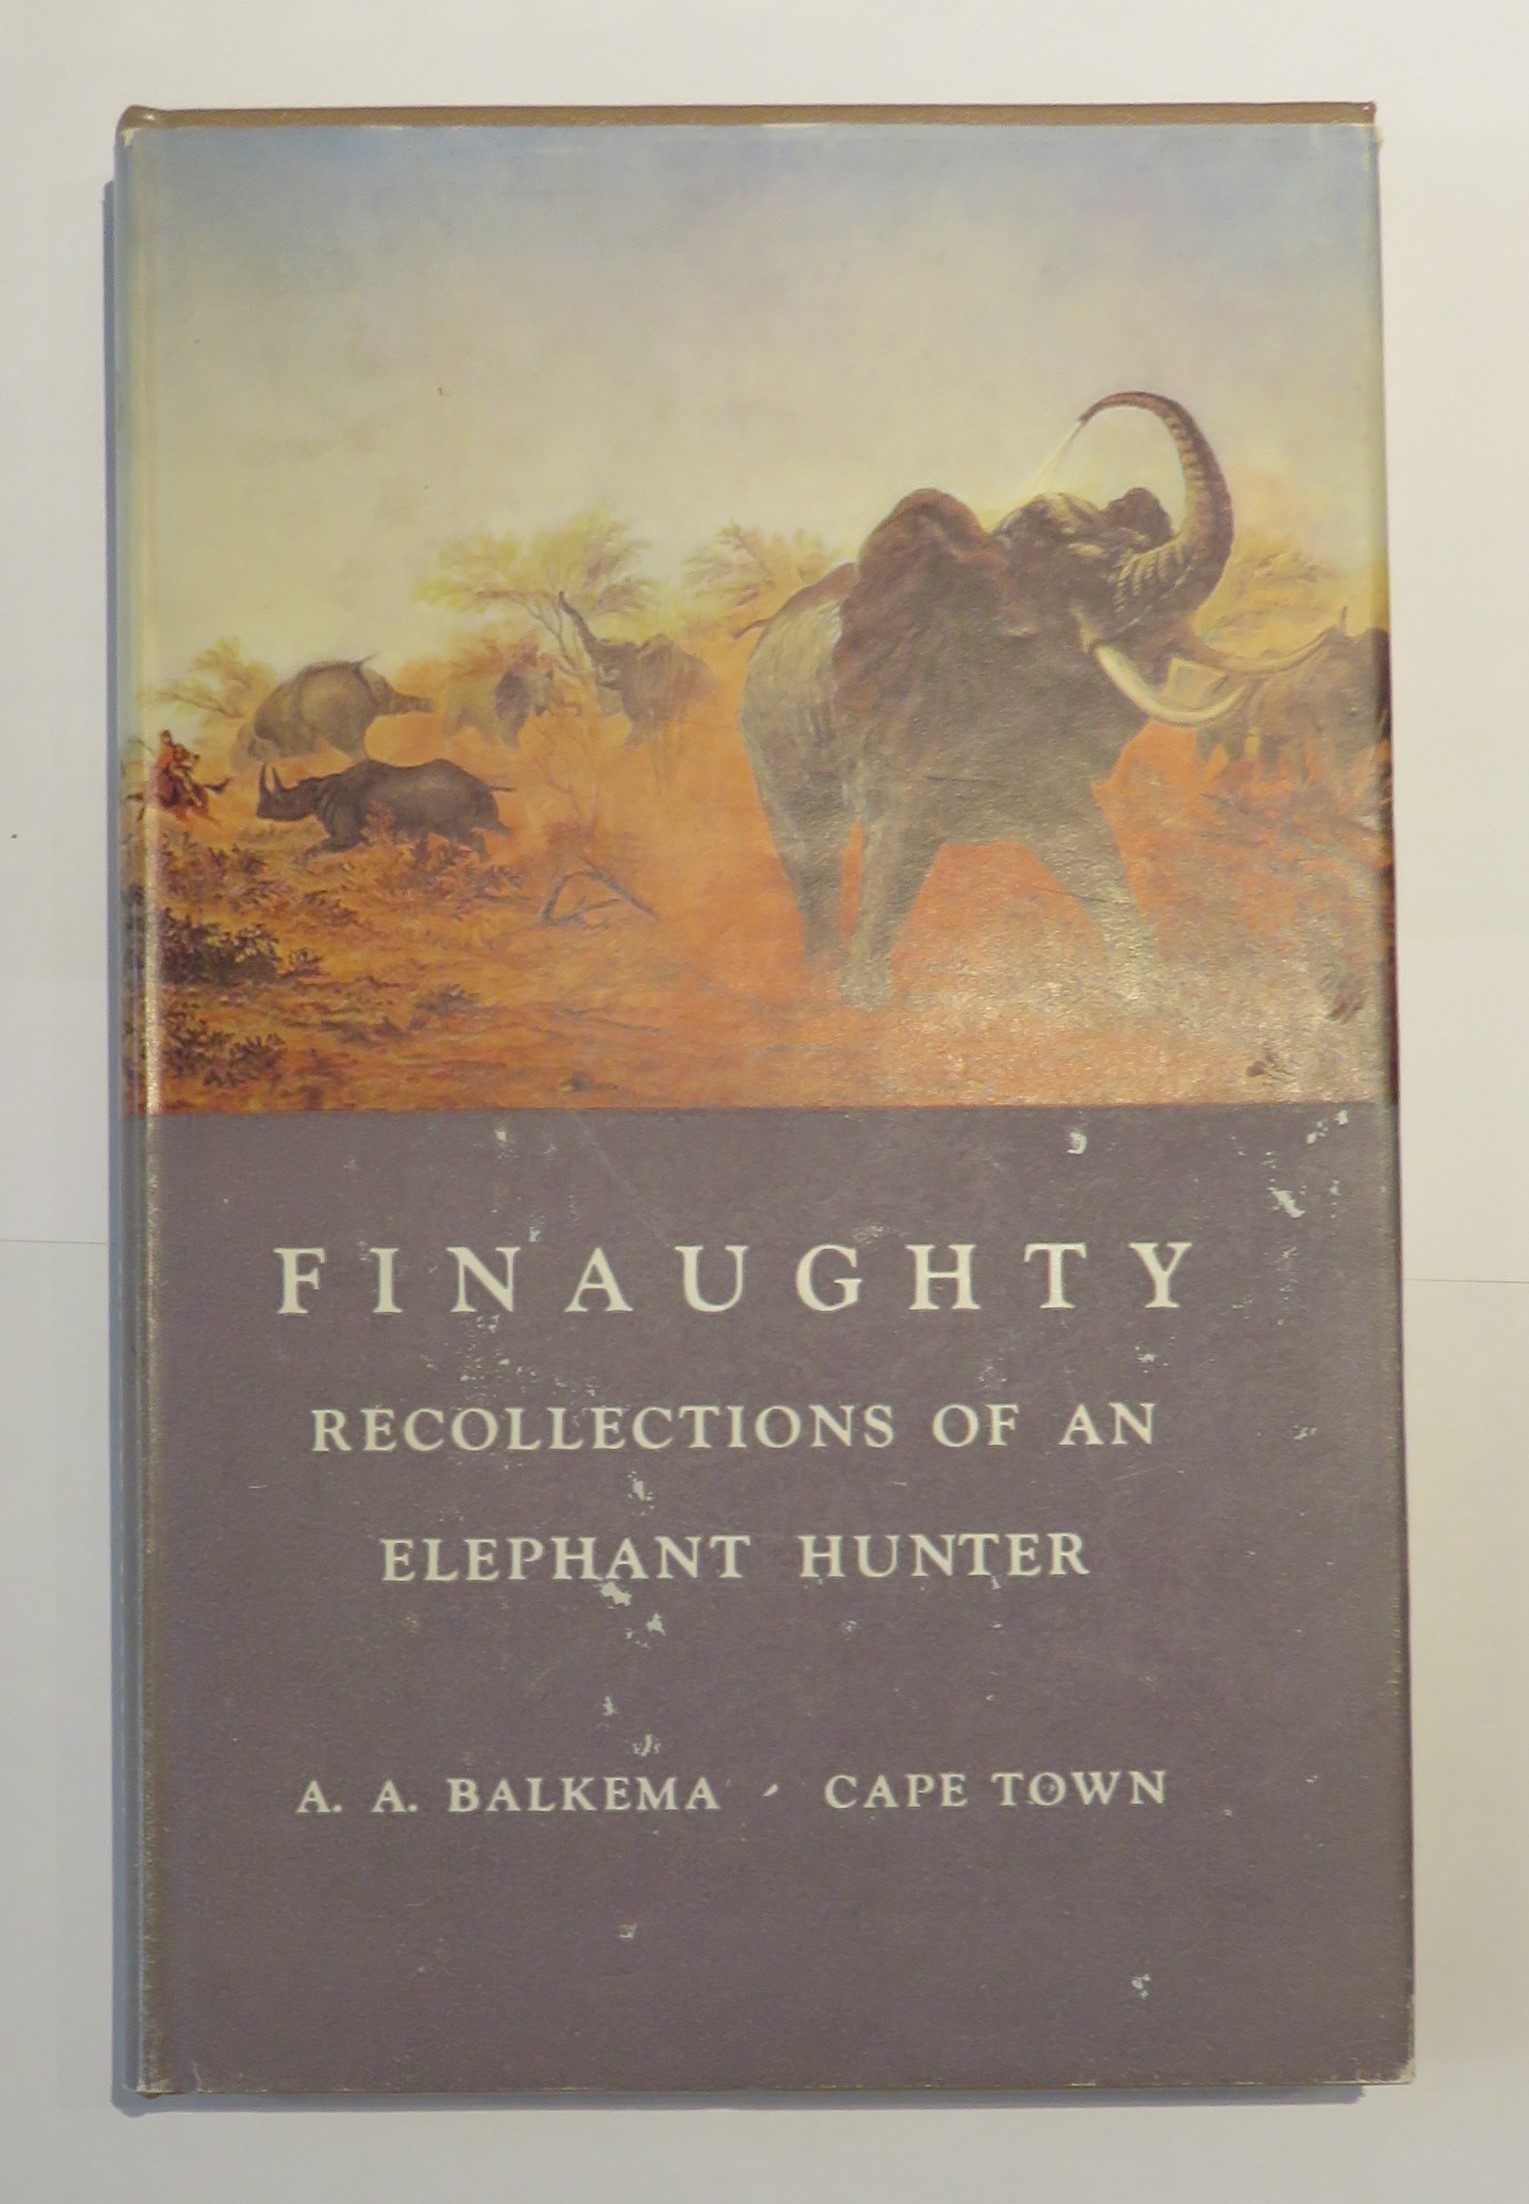 Recollections of an Elephant Hunter